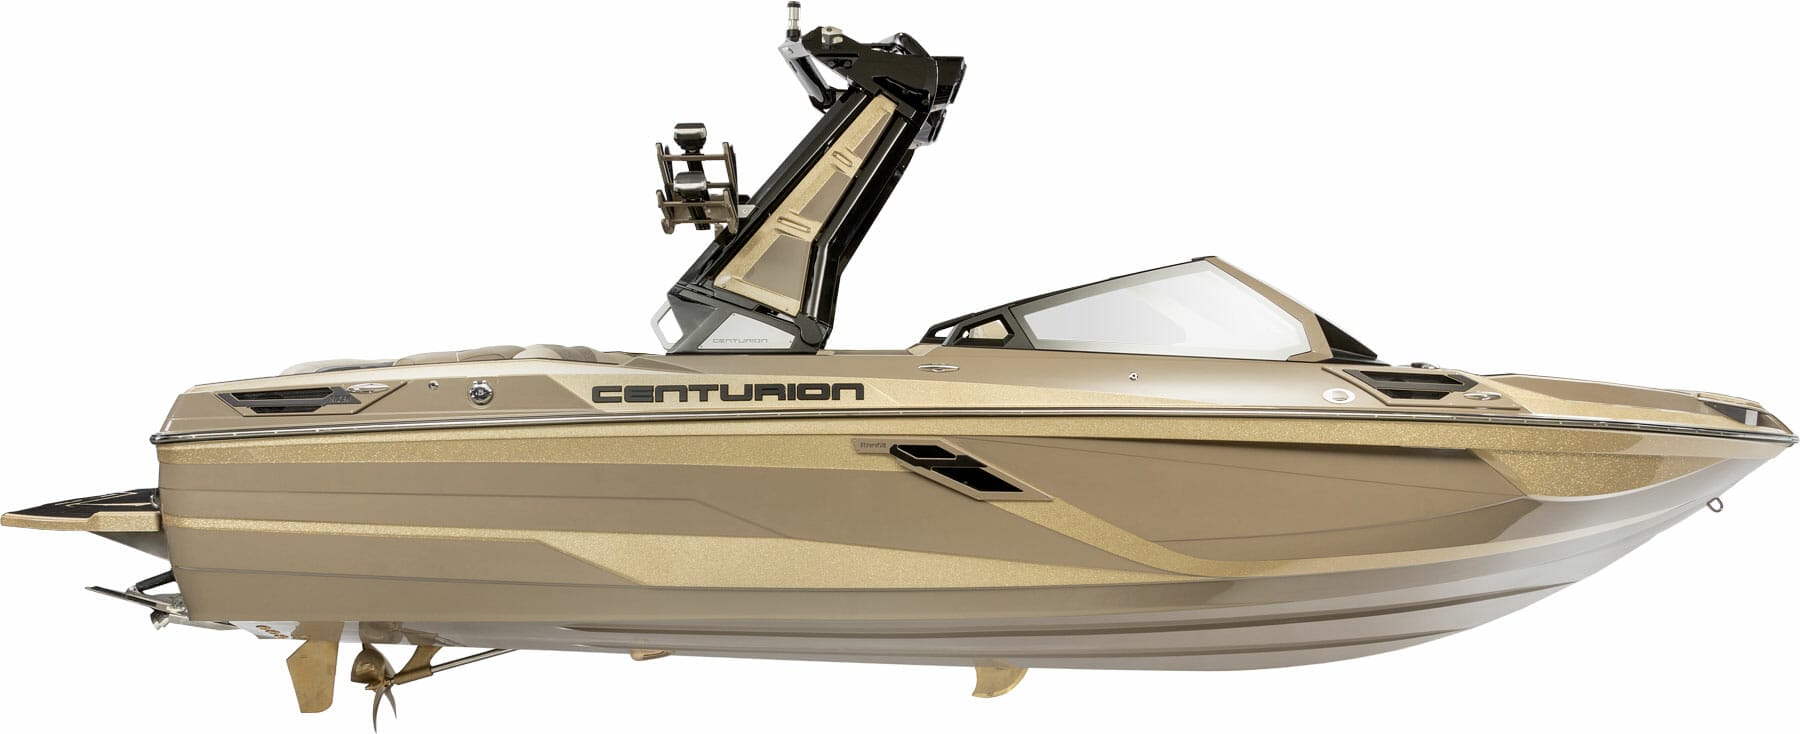 A wakeboat on a white background.